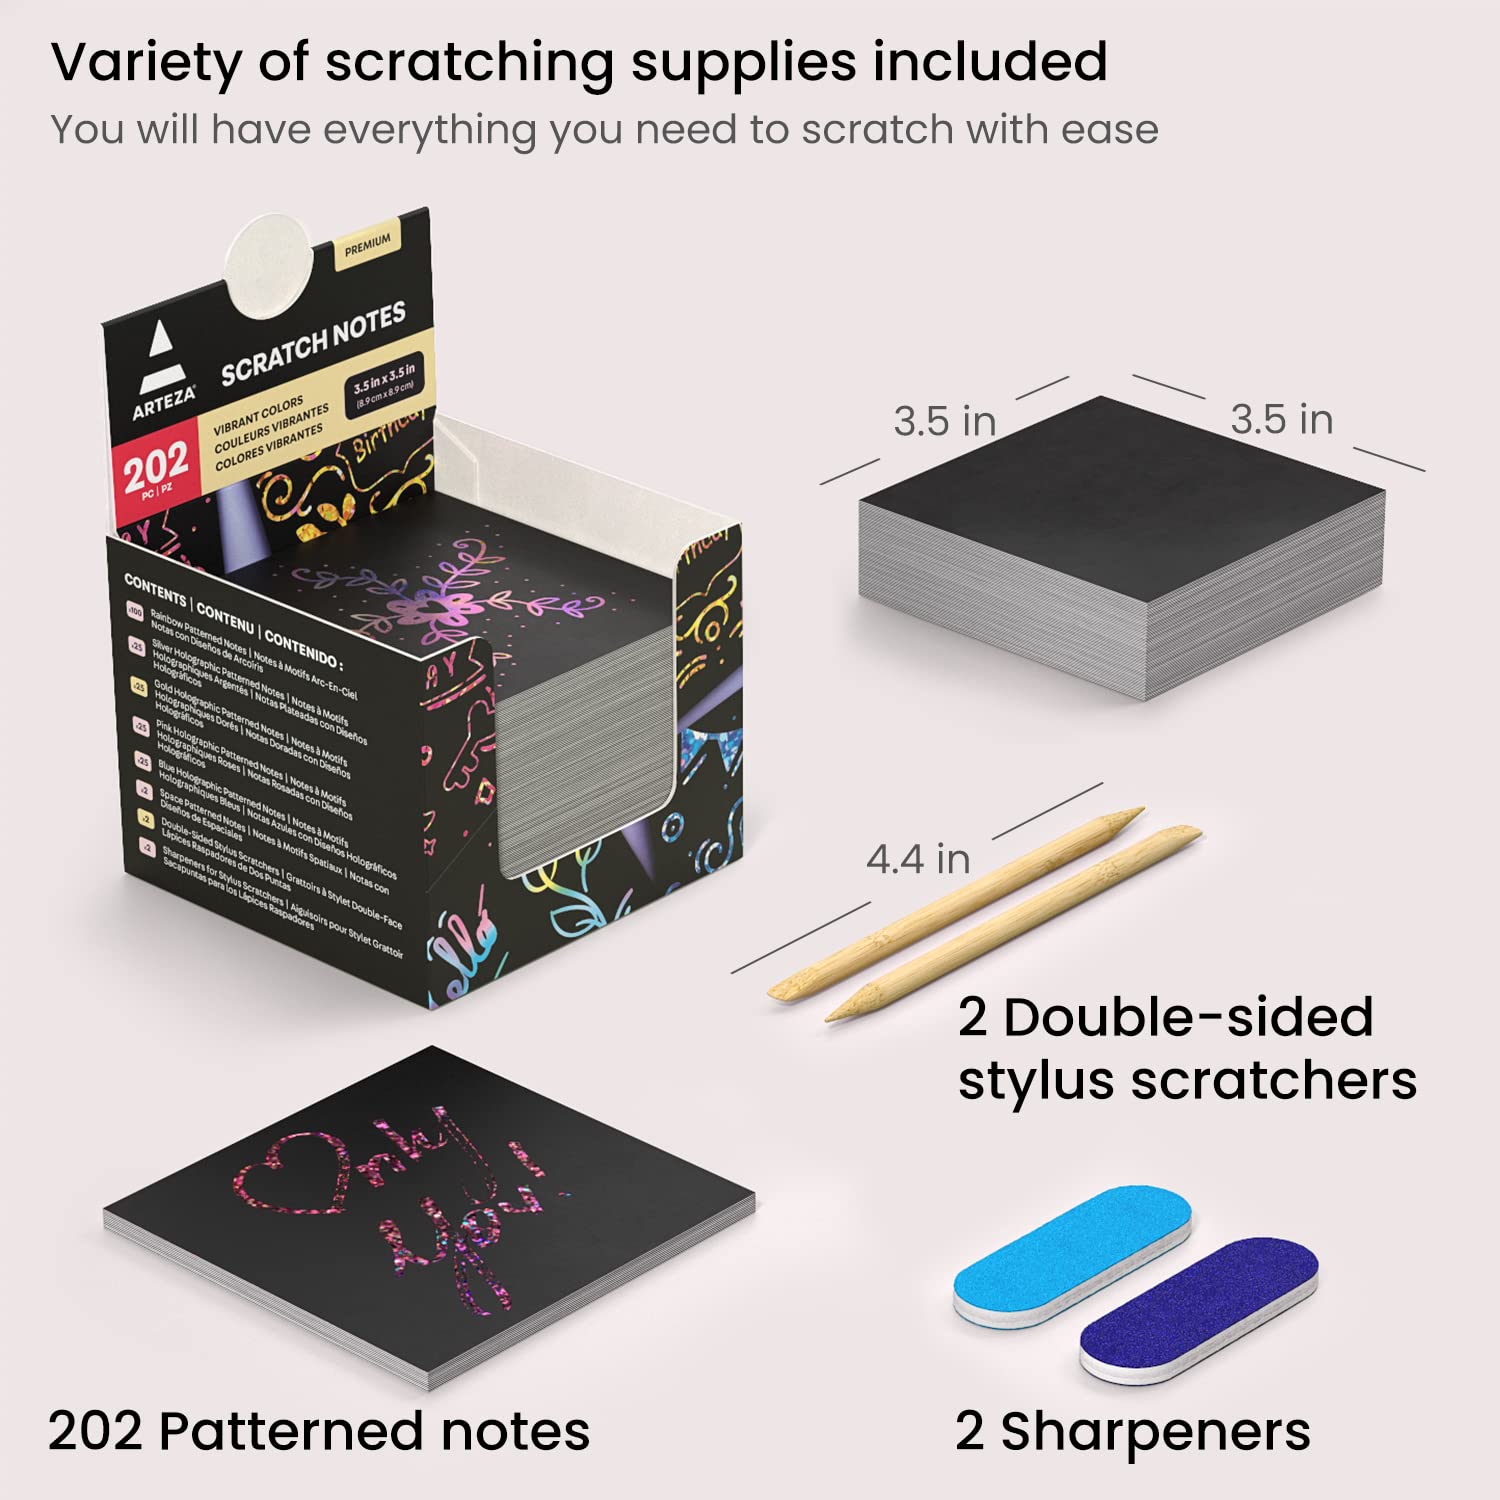 ARTEZA Scratch Paper, Set of 202 Notes, 3.5 x 3.5 Inches, 200 Holographic — Gold, Silver, Pink, and Blue, and 2 Gold-Foil Star Backgrounds, 2 Scratchers, 2 Sharpeners, Art Supplies for Craft and DIY